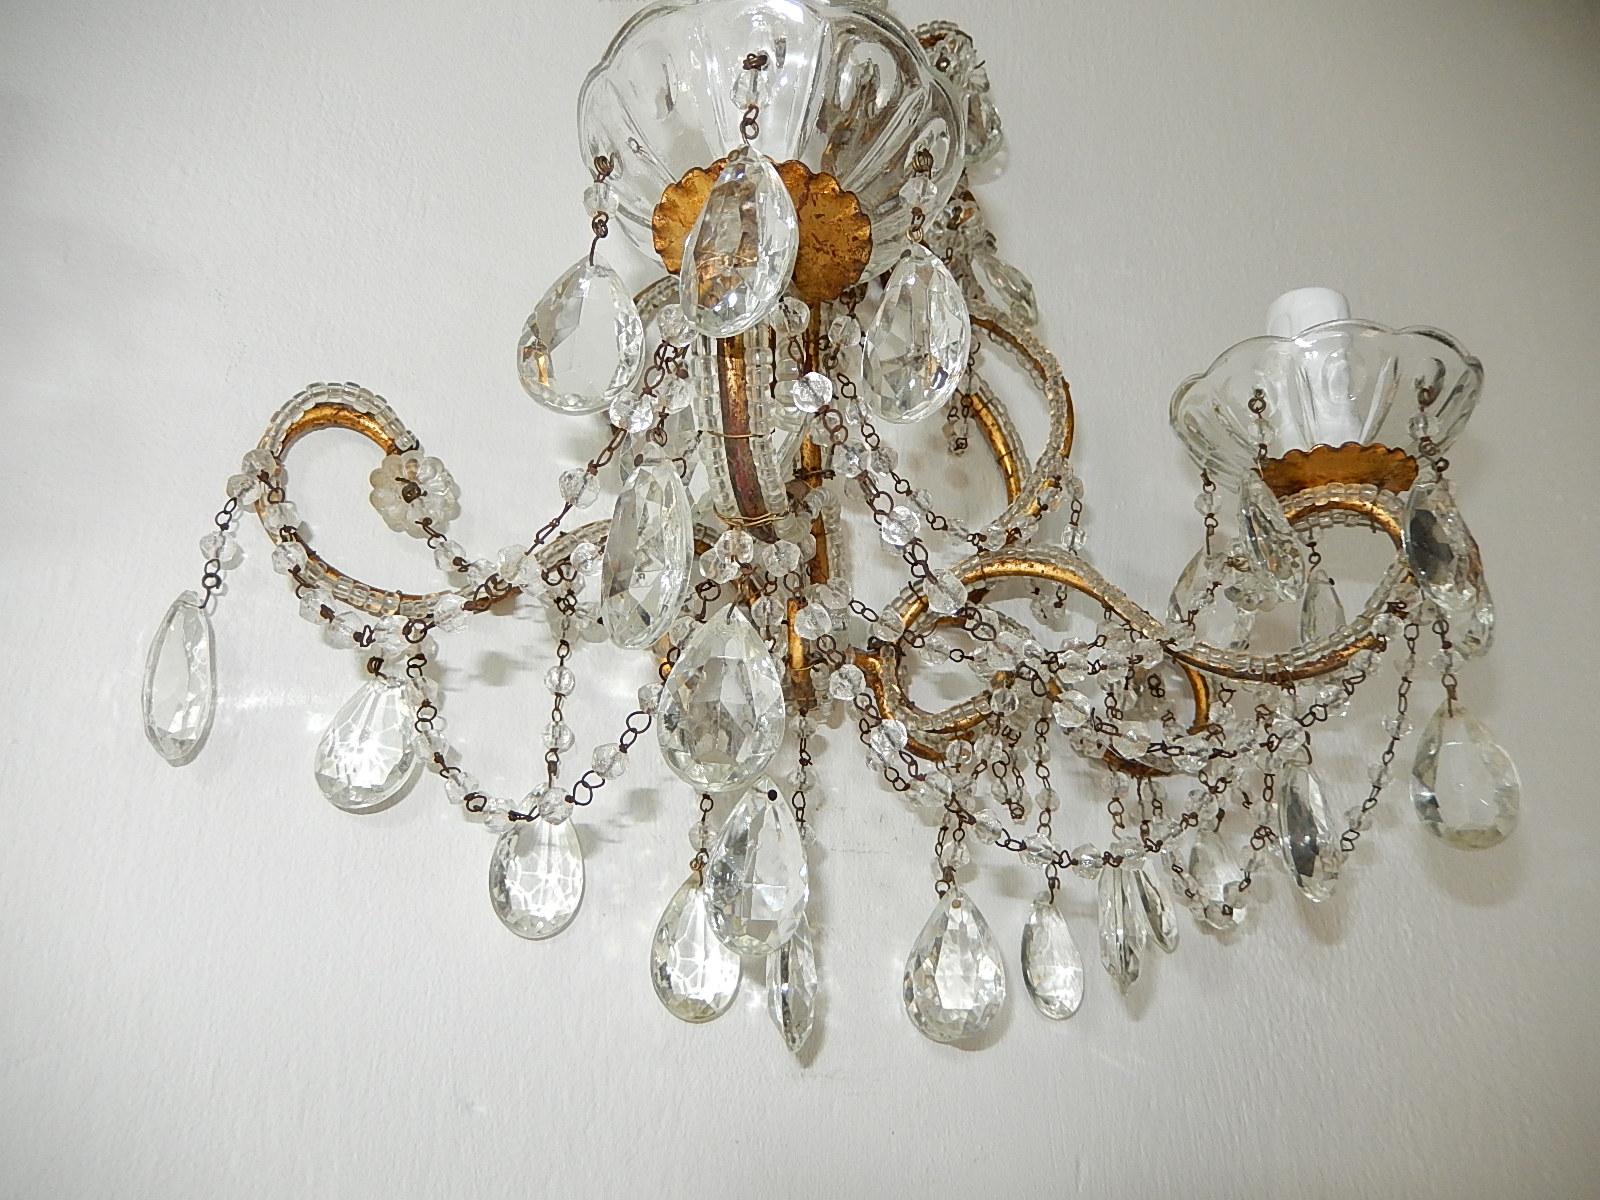 1900 Italian Rococo Beaded Crystal Prisms Gold Gilt Sconces For Sale 2